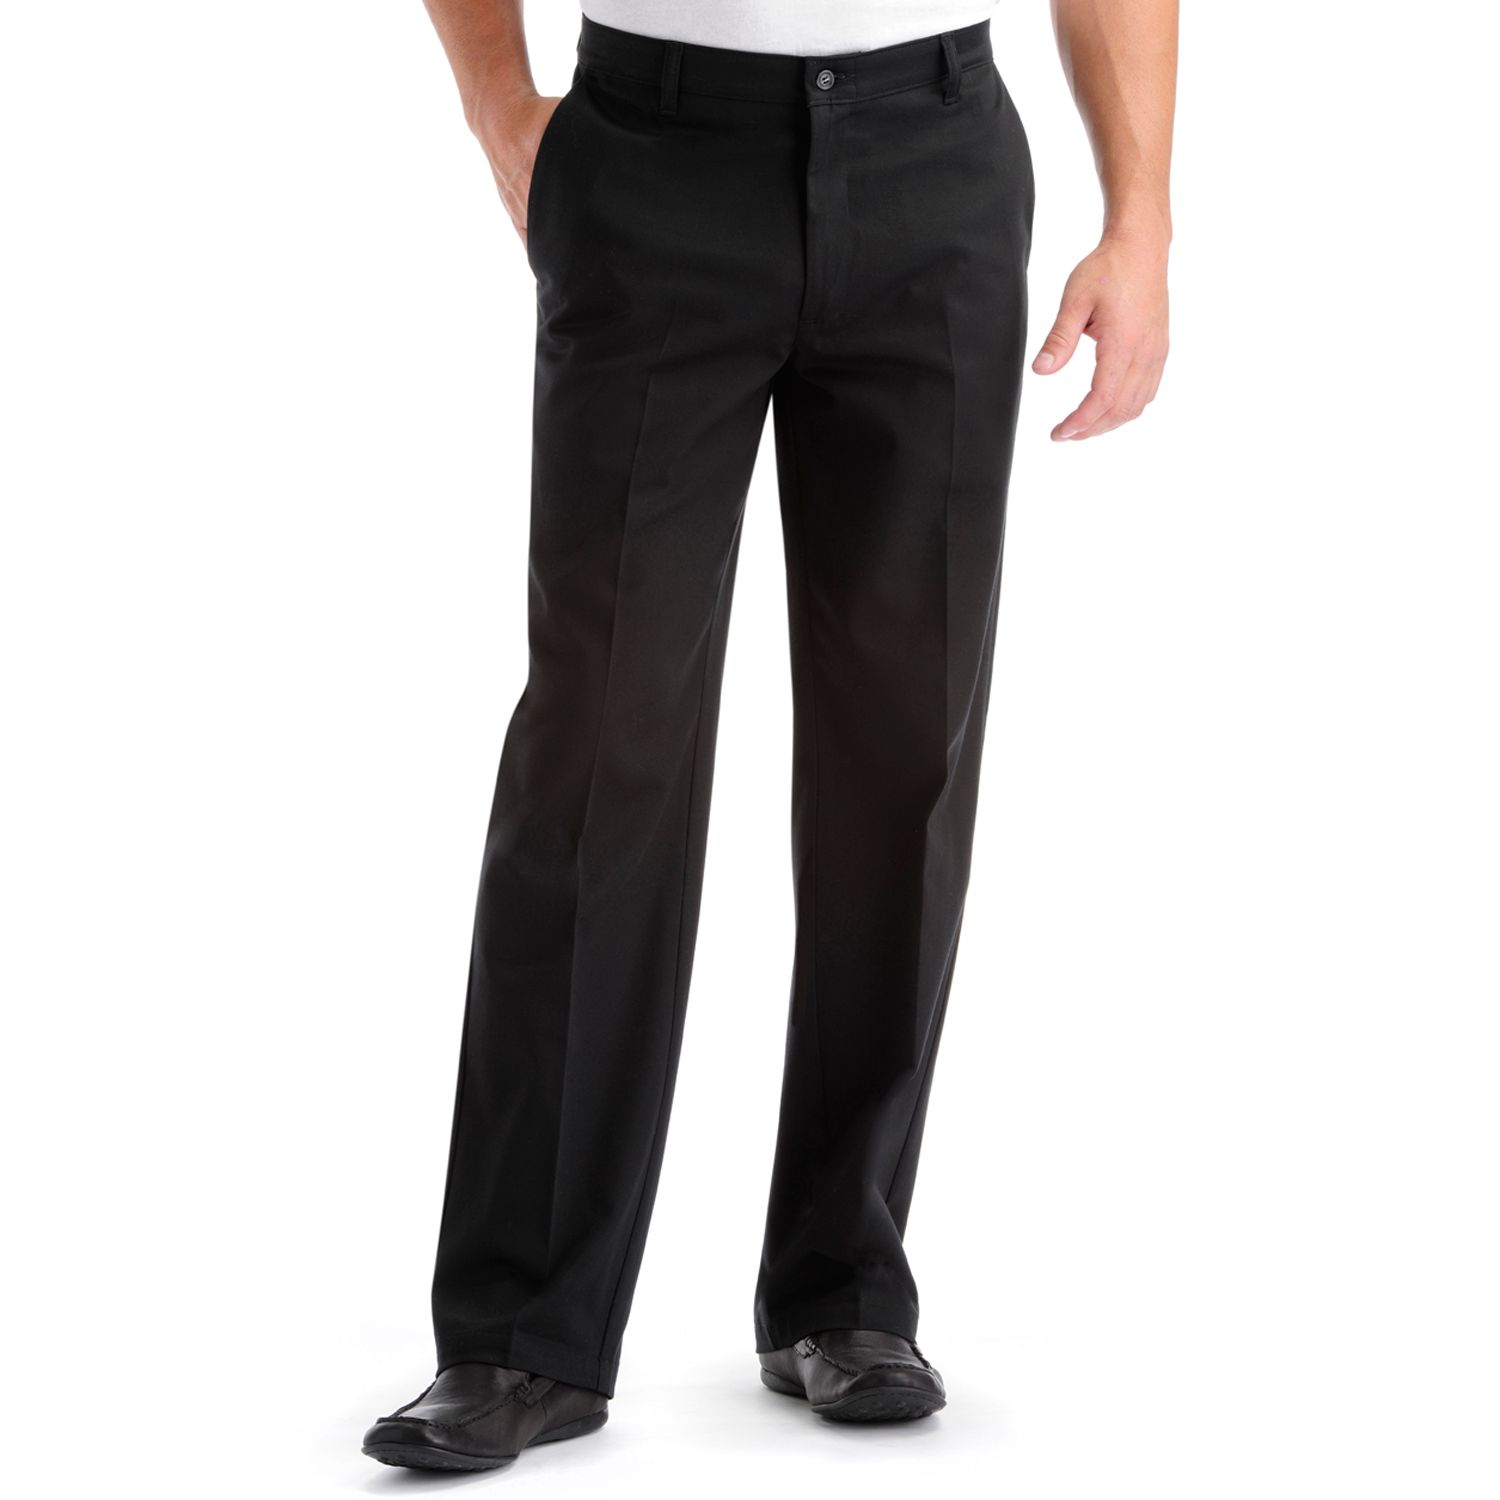 relaxed fit black pants